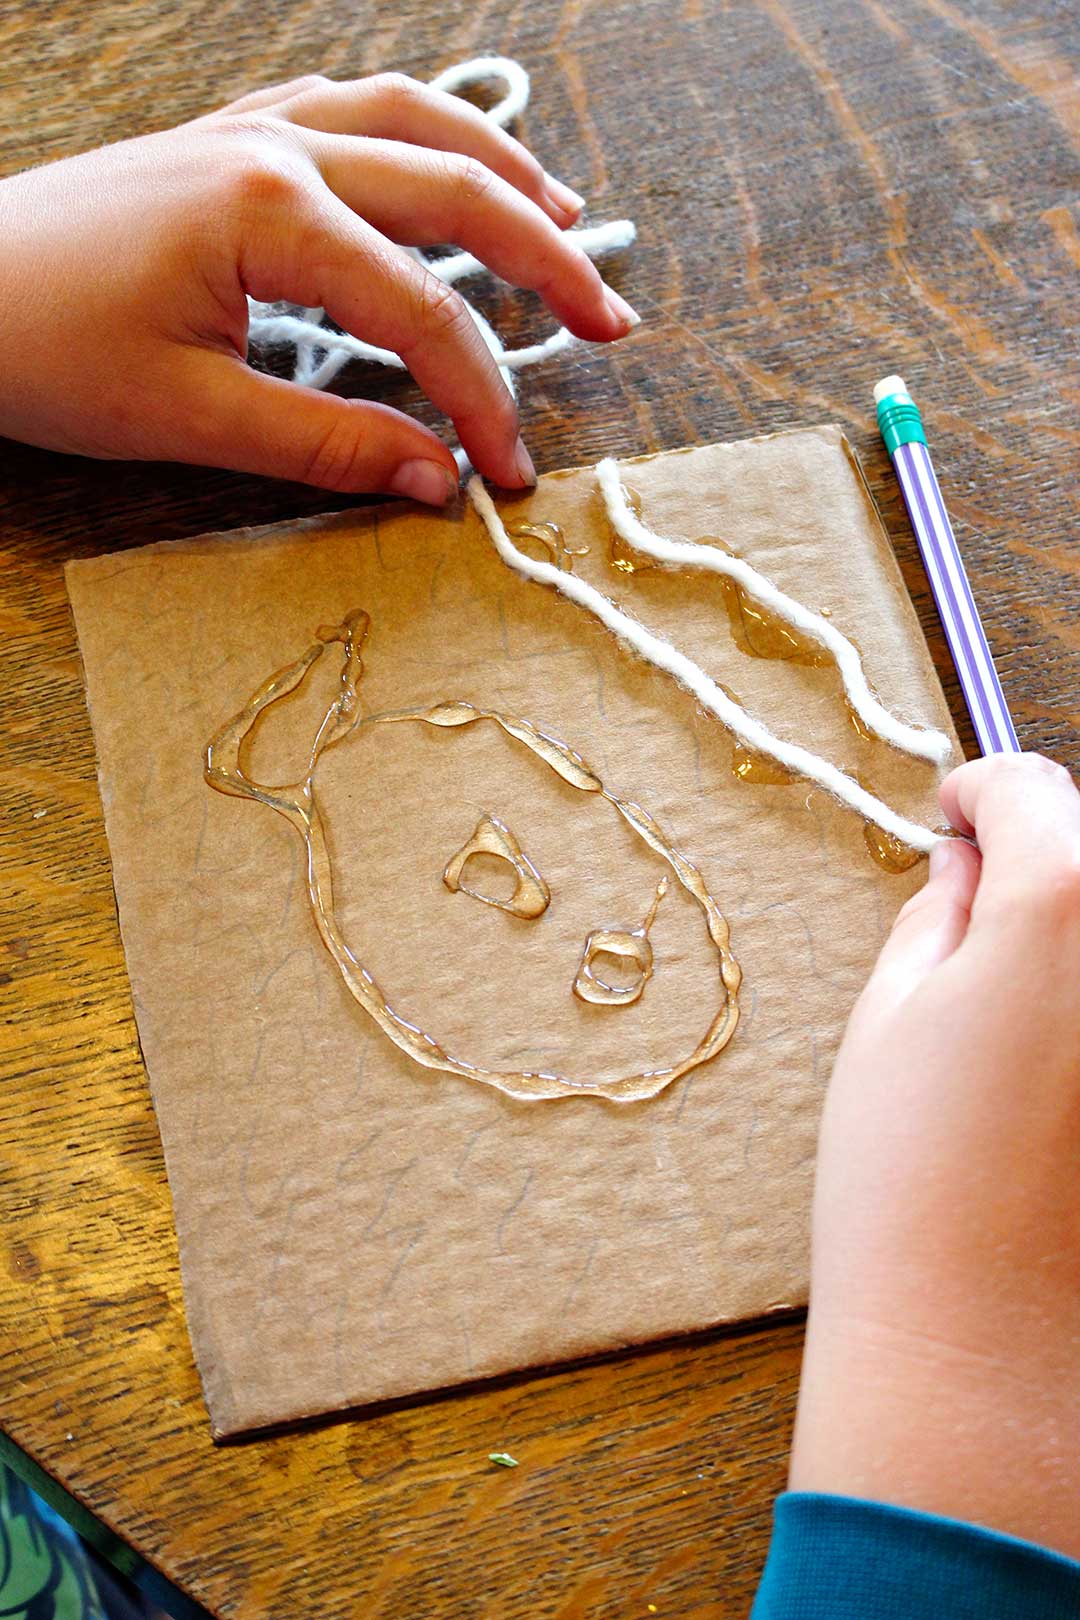 A child gluing a piece of yarn to a square of cardboard in the shape of waves above a fish.